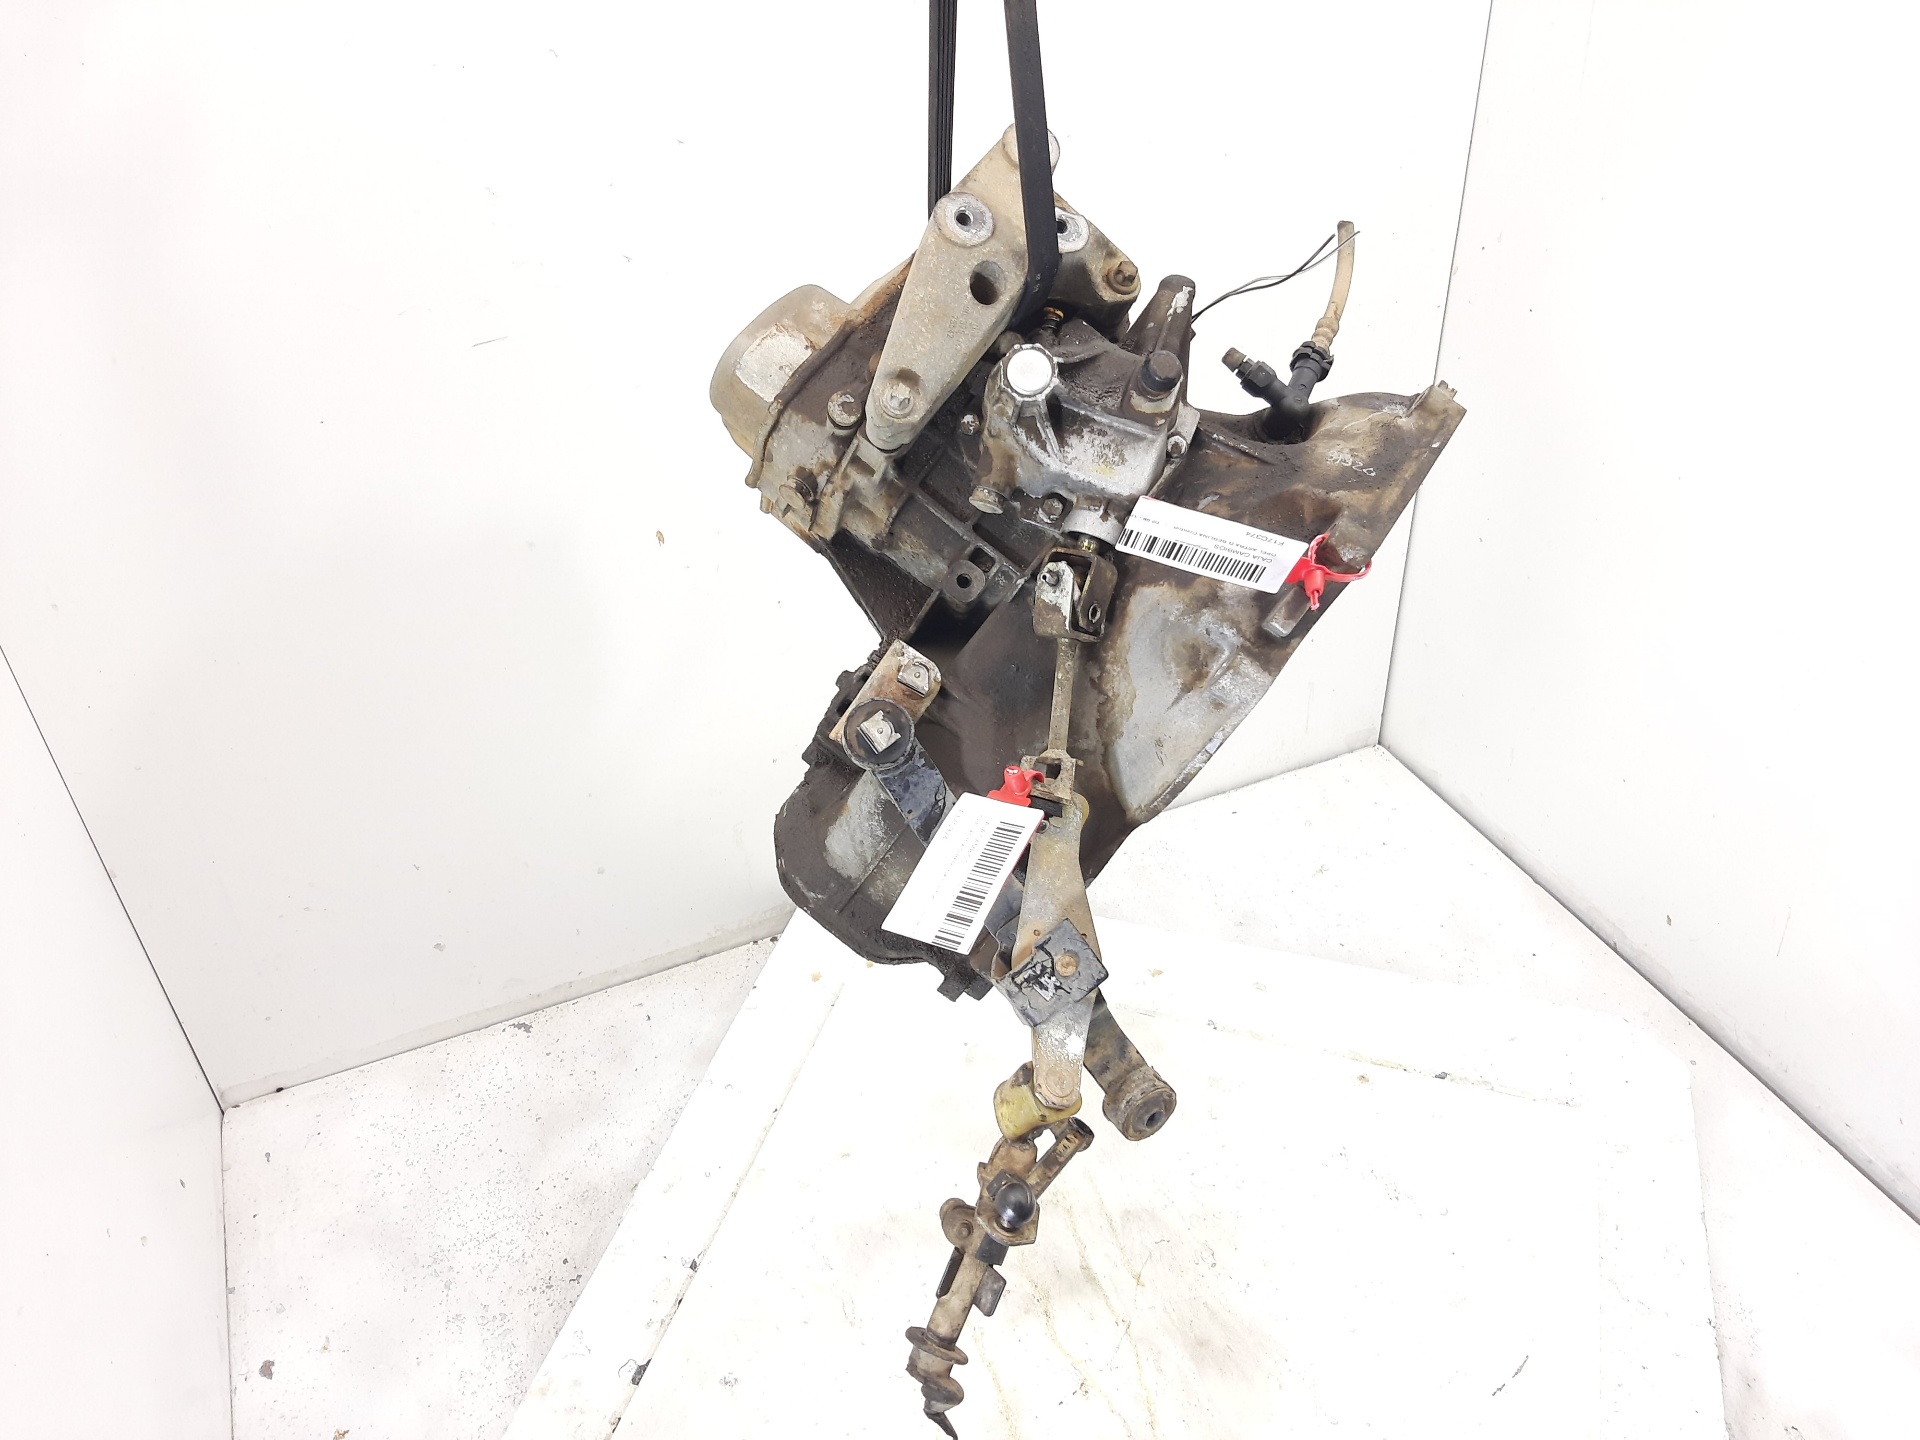 OPEL Astra H (2004-2014) Gearbox F17C374, 5VELOCIDADES 24123774